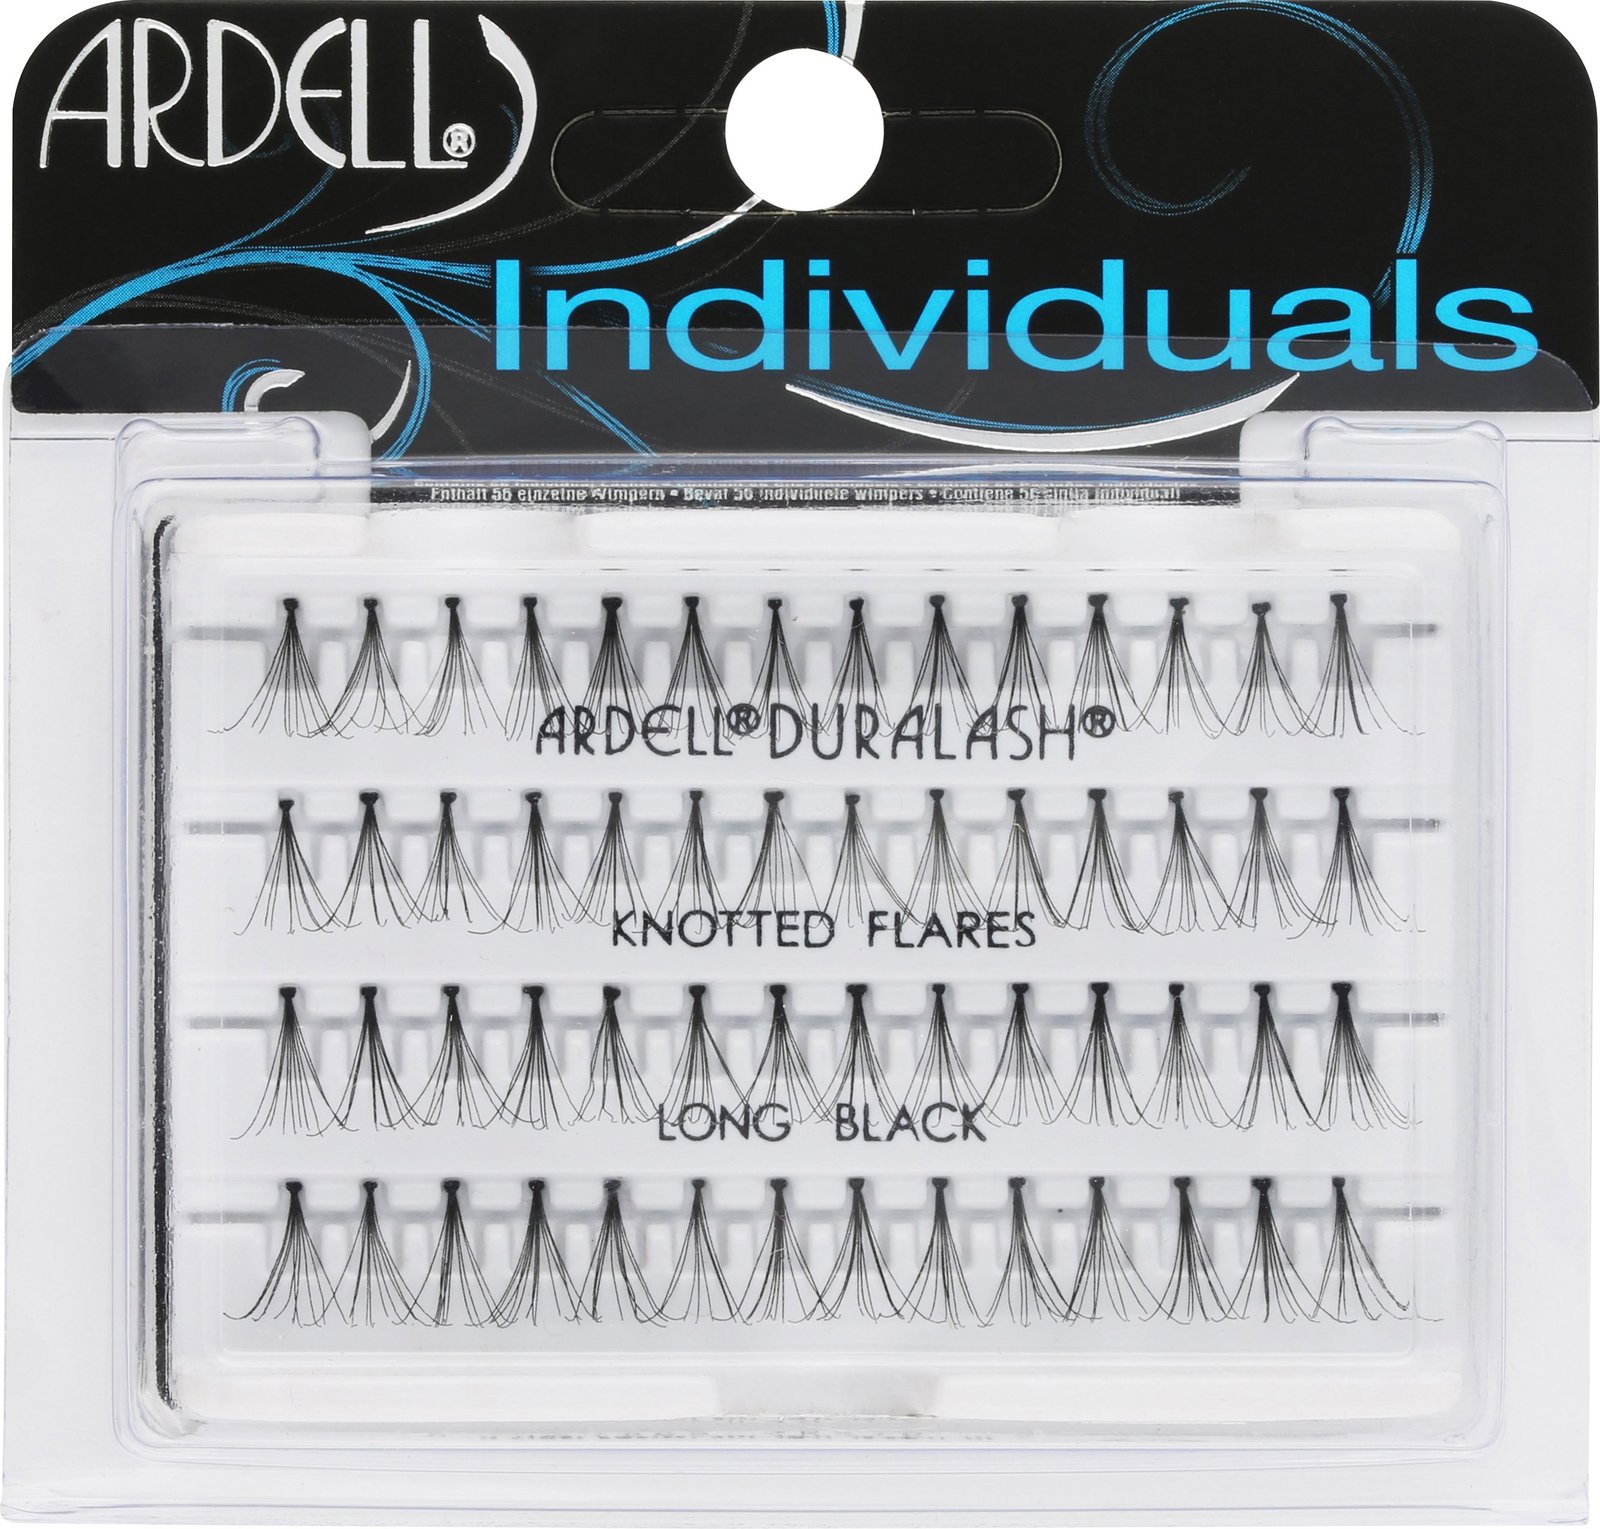 ARDELL Individuals DuraLash Knotted Flares Long 56 st